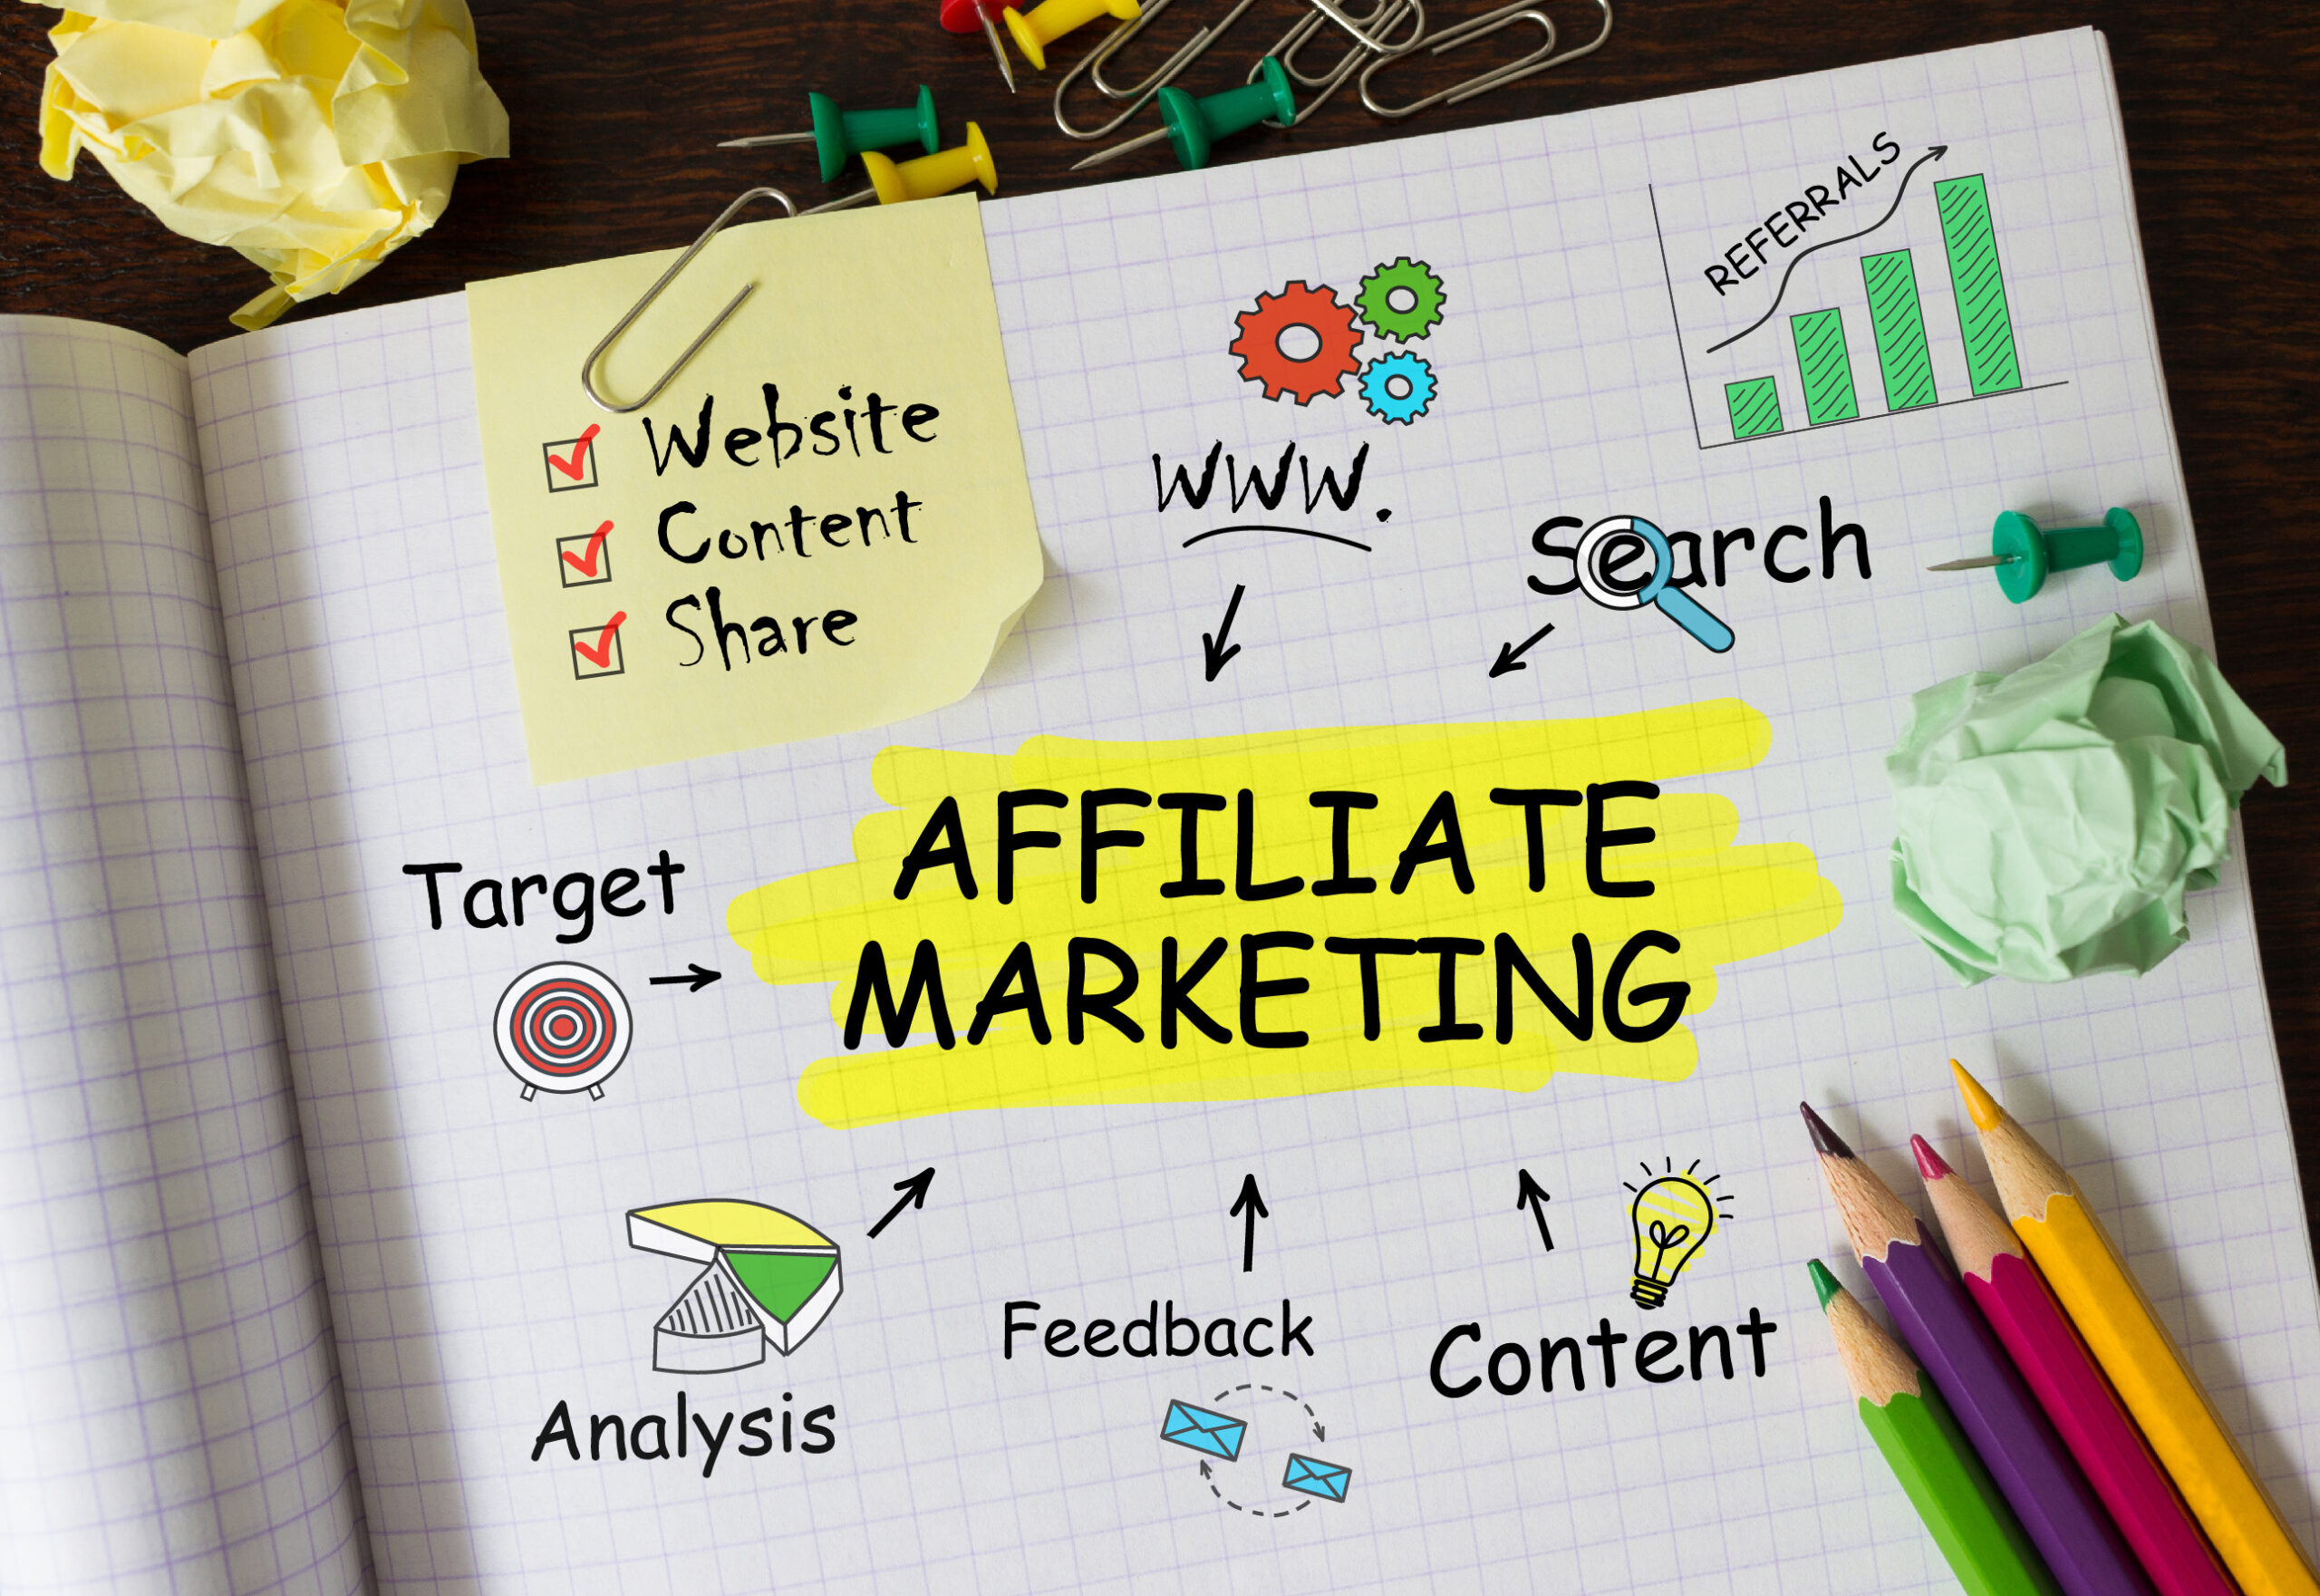 5 Warning Signs Of Affiliate Marketing Scams